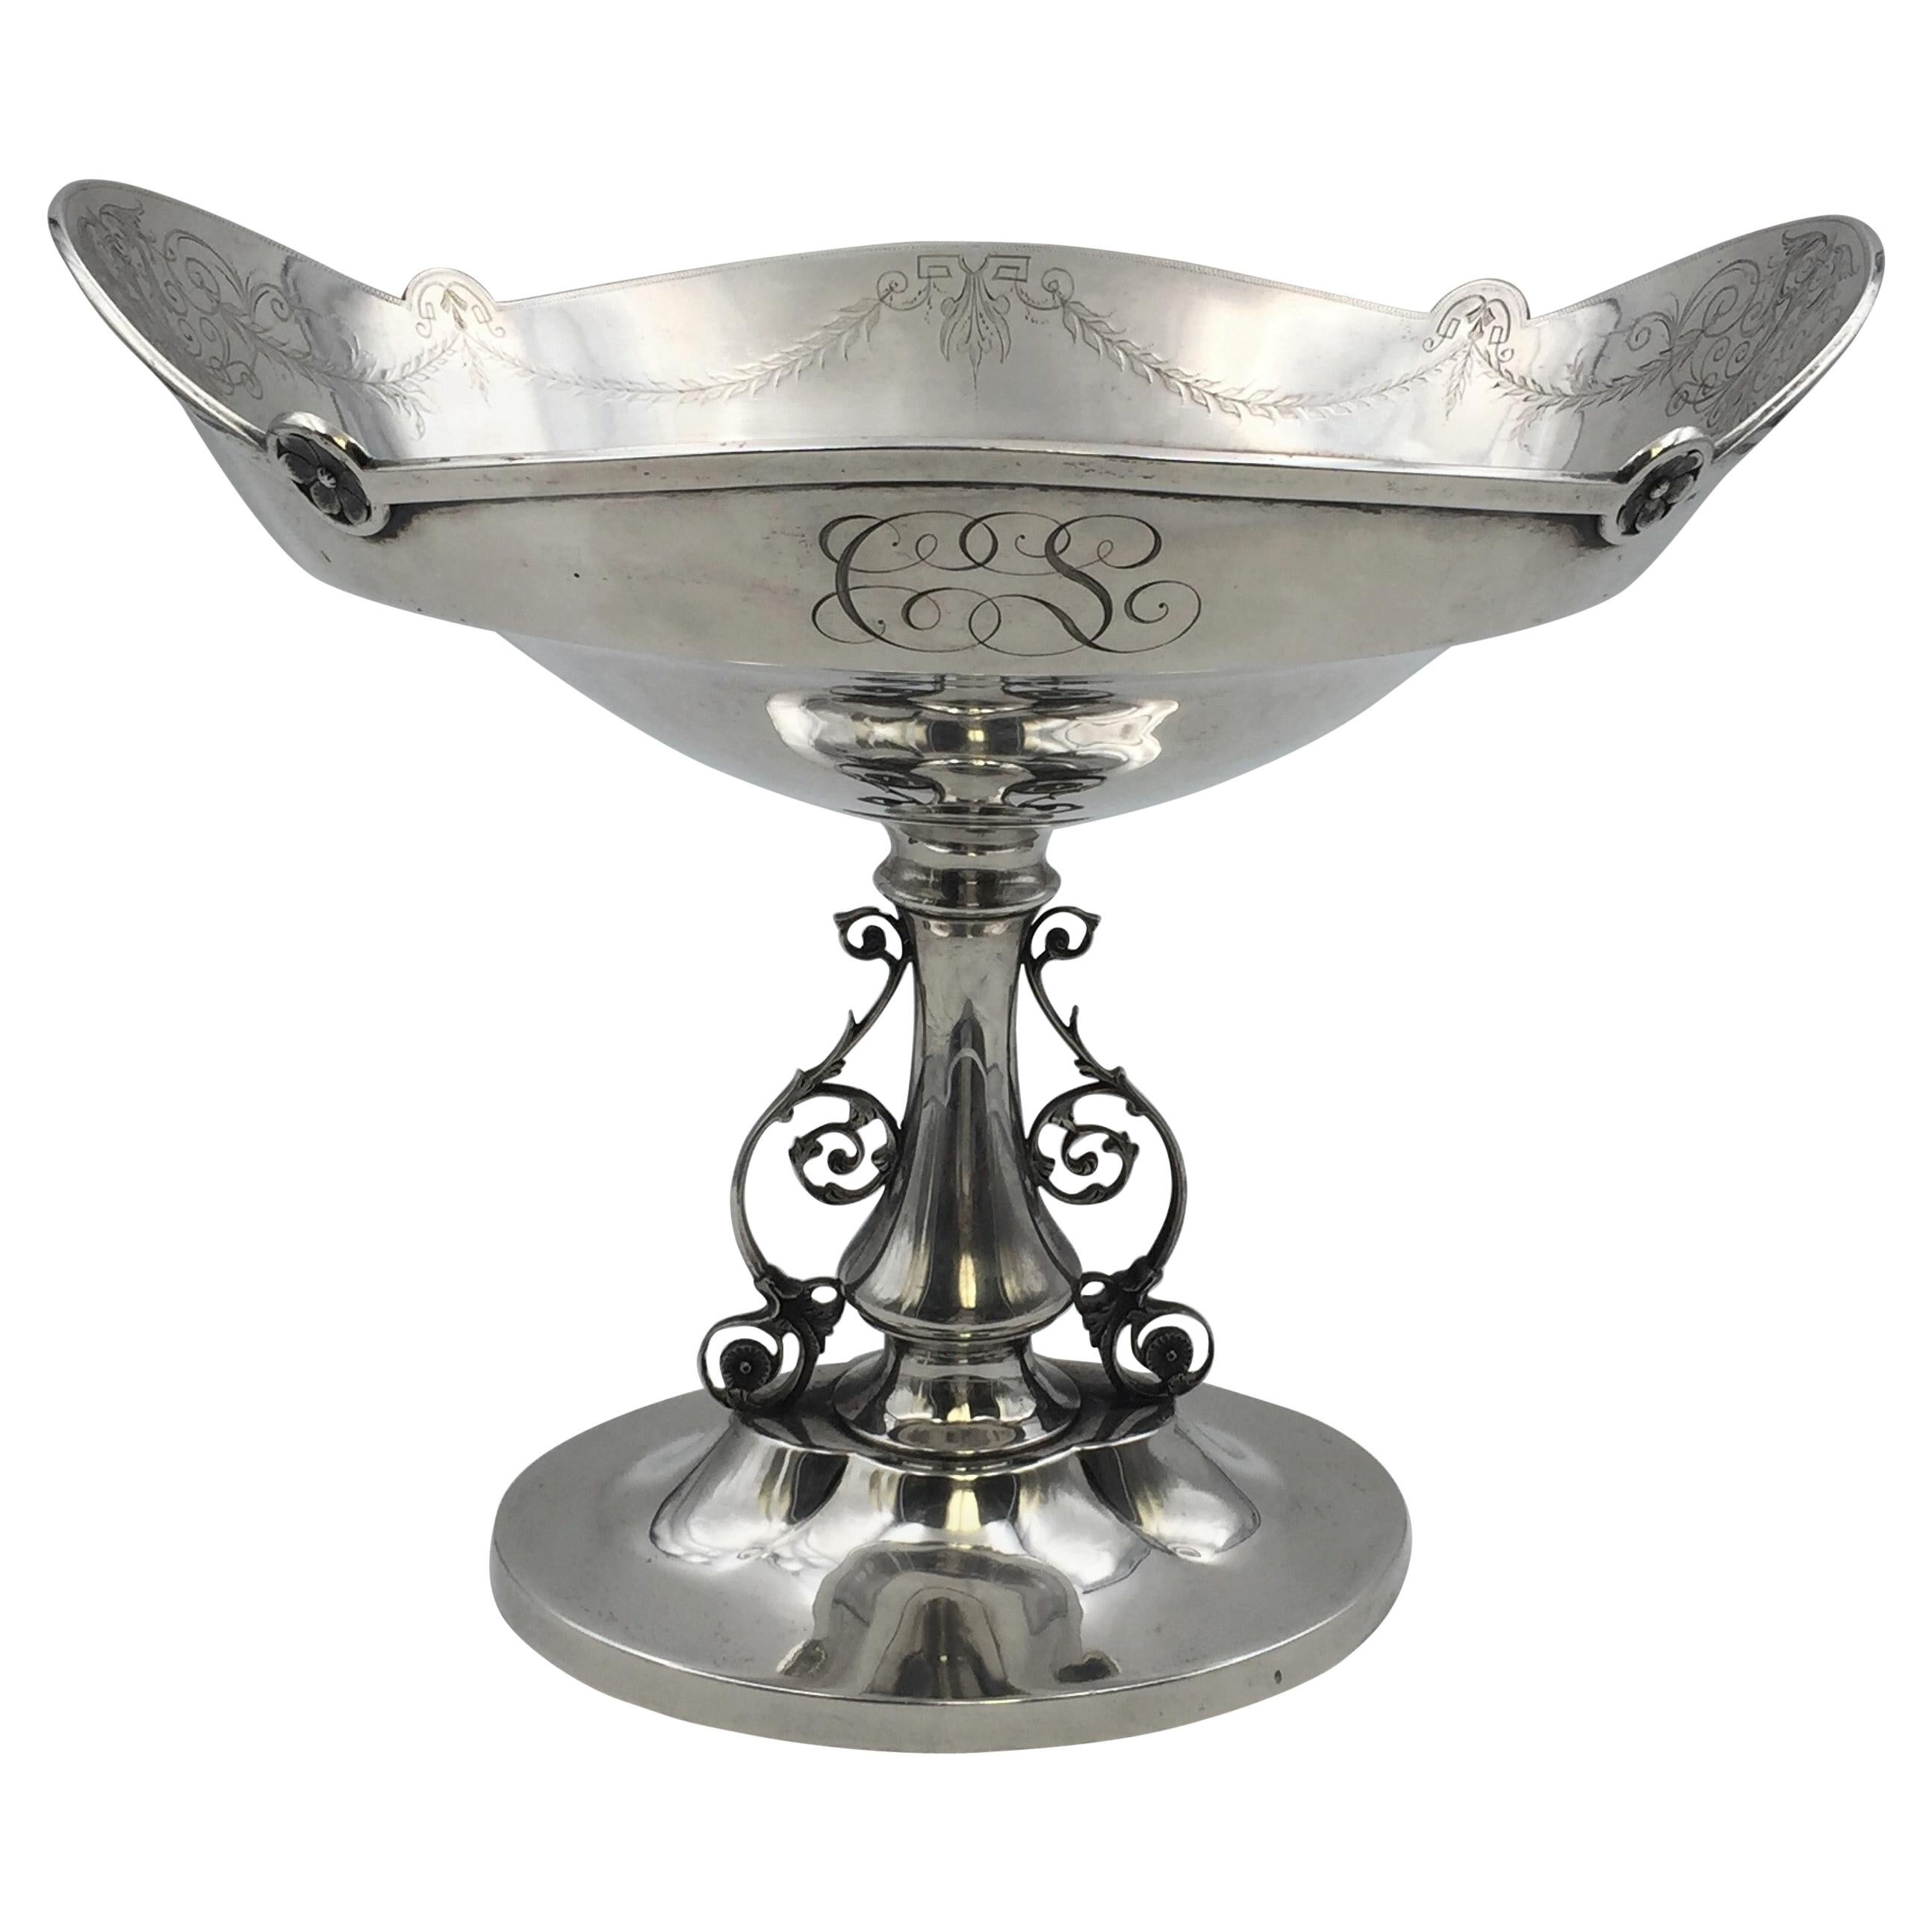 Duhme & Co Coin Silver Centerpiece from Early 1800s